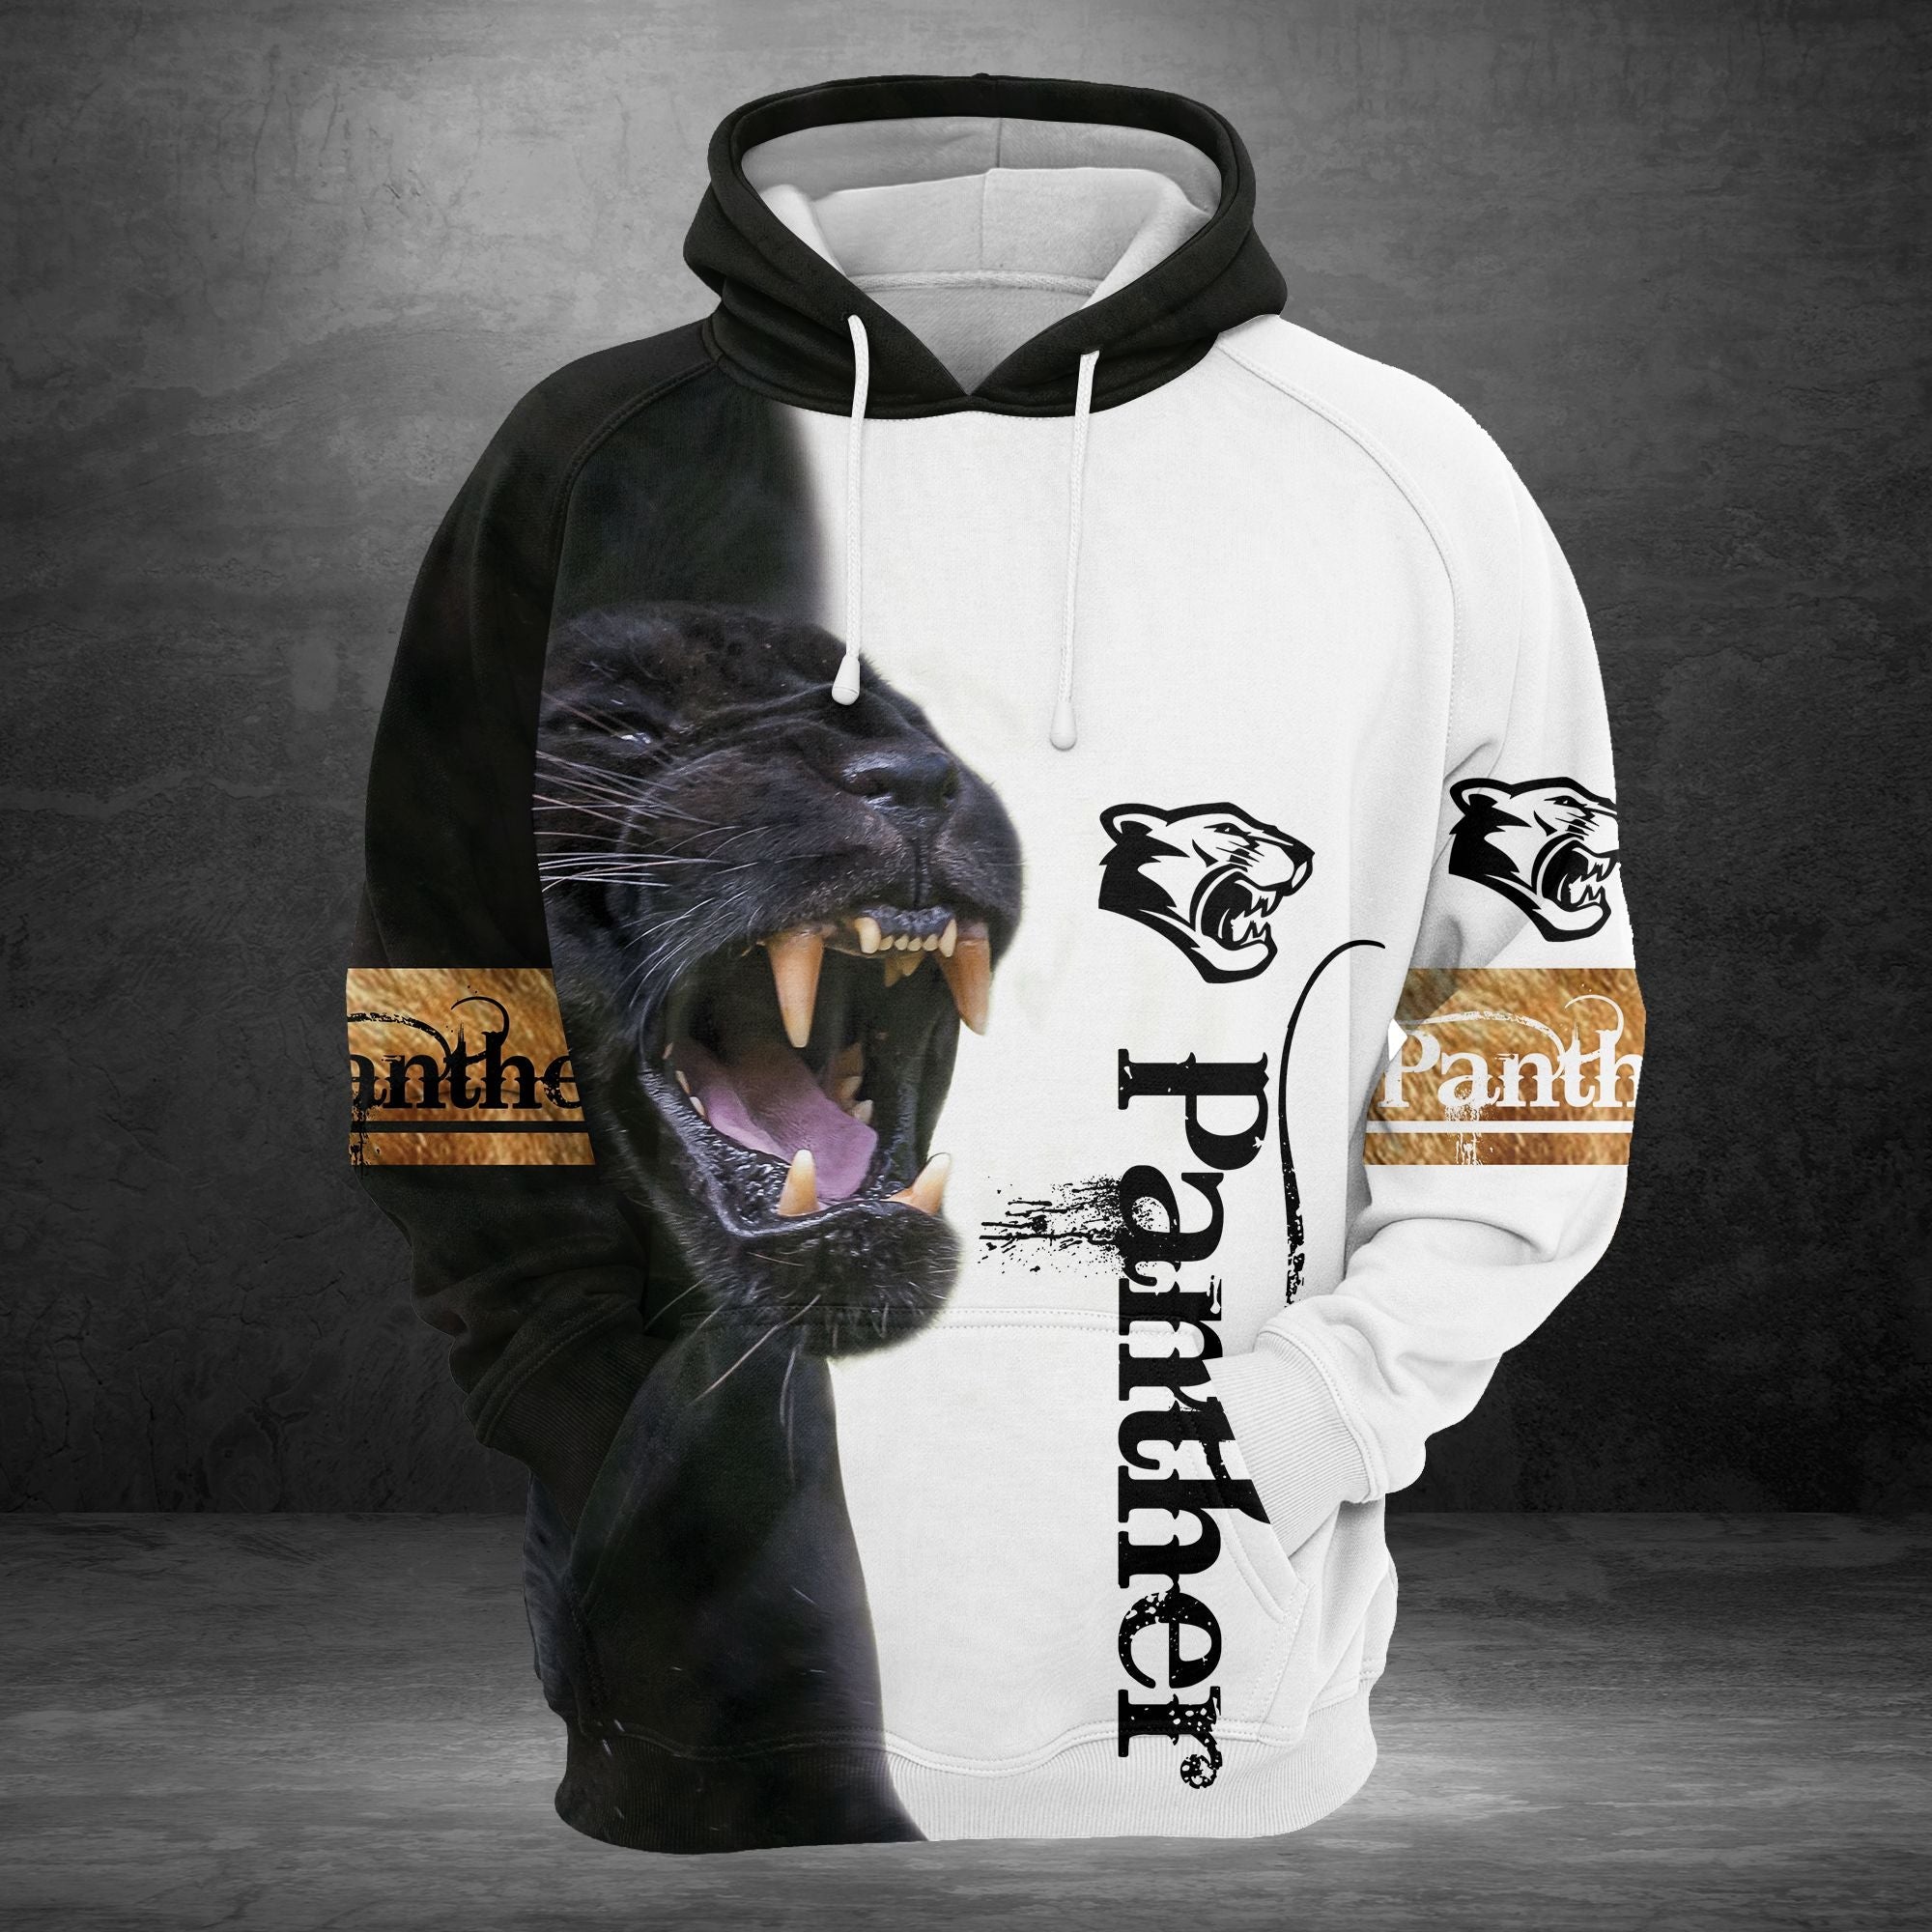 Black Panther Pullover Premium Hoodie, Perfect Outfit For Men And Women On Christmas New Year Autumn Winter